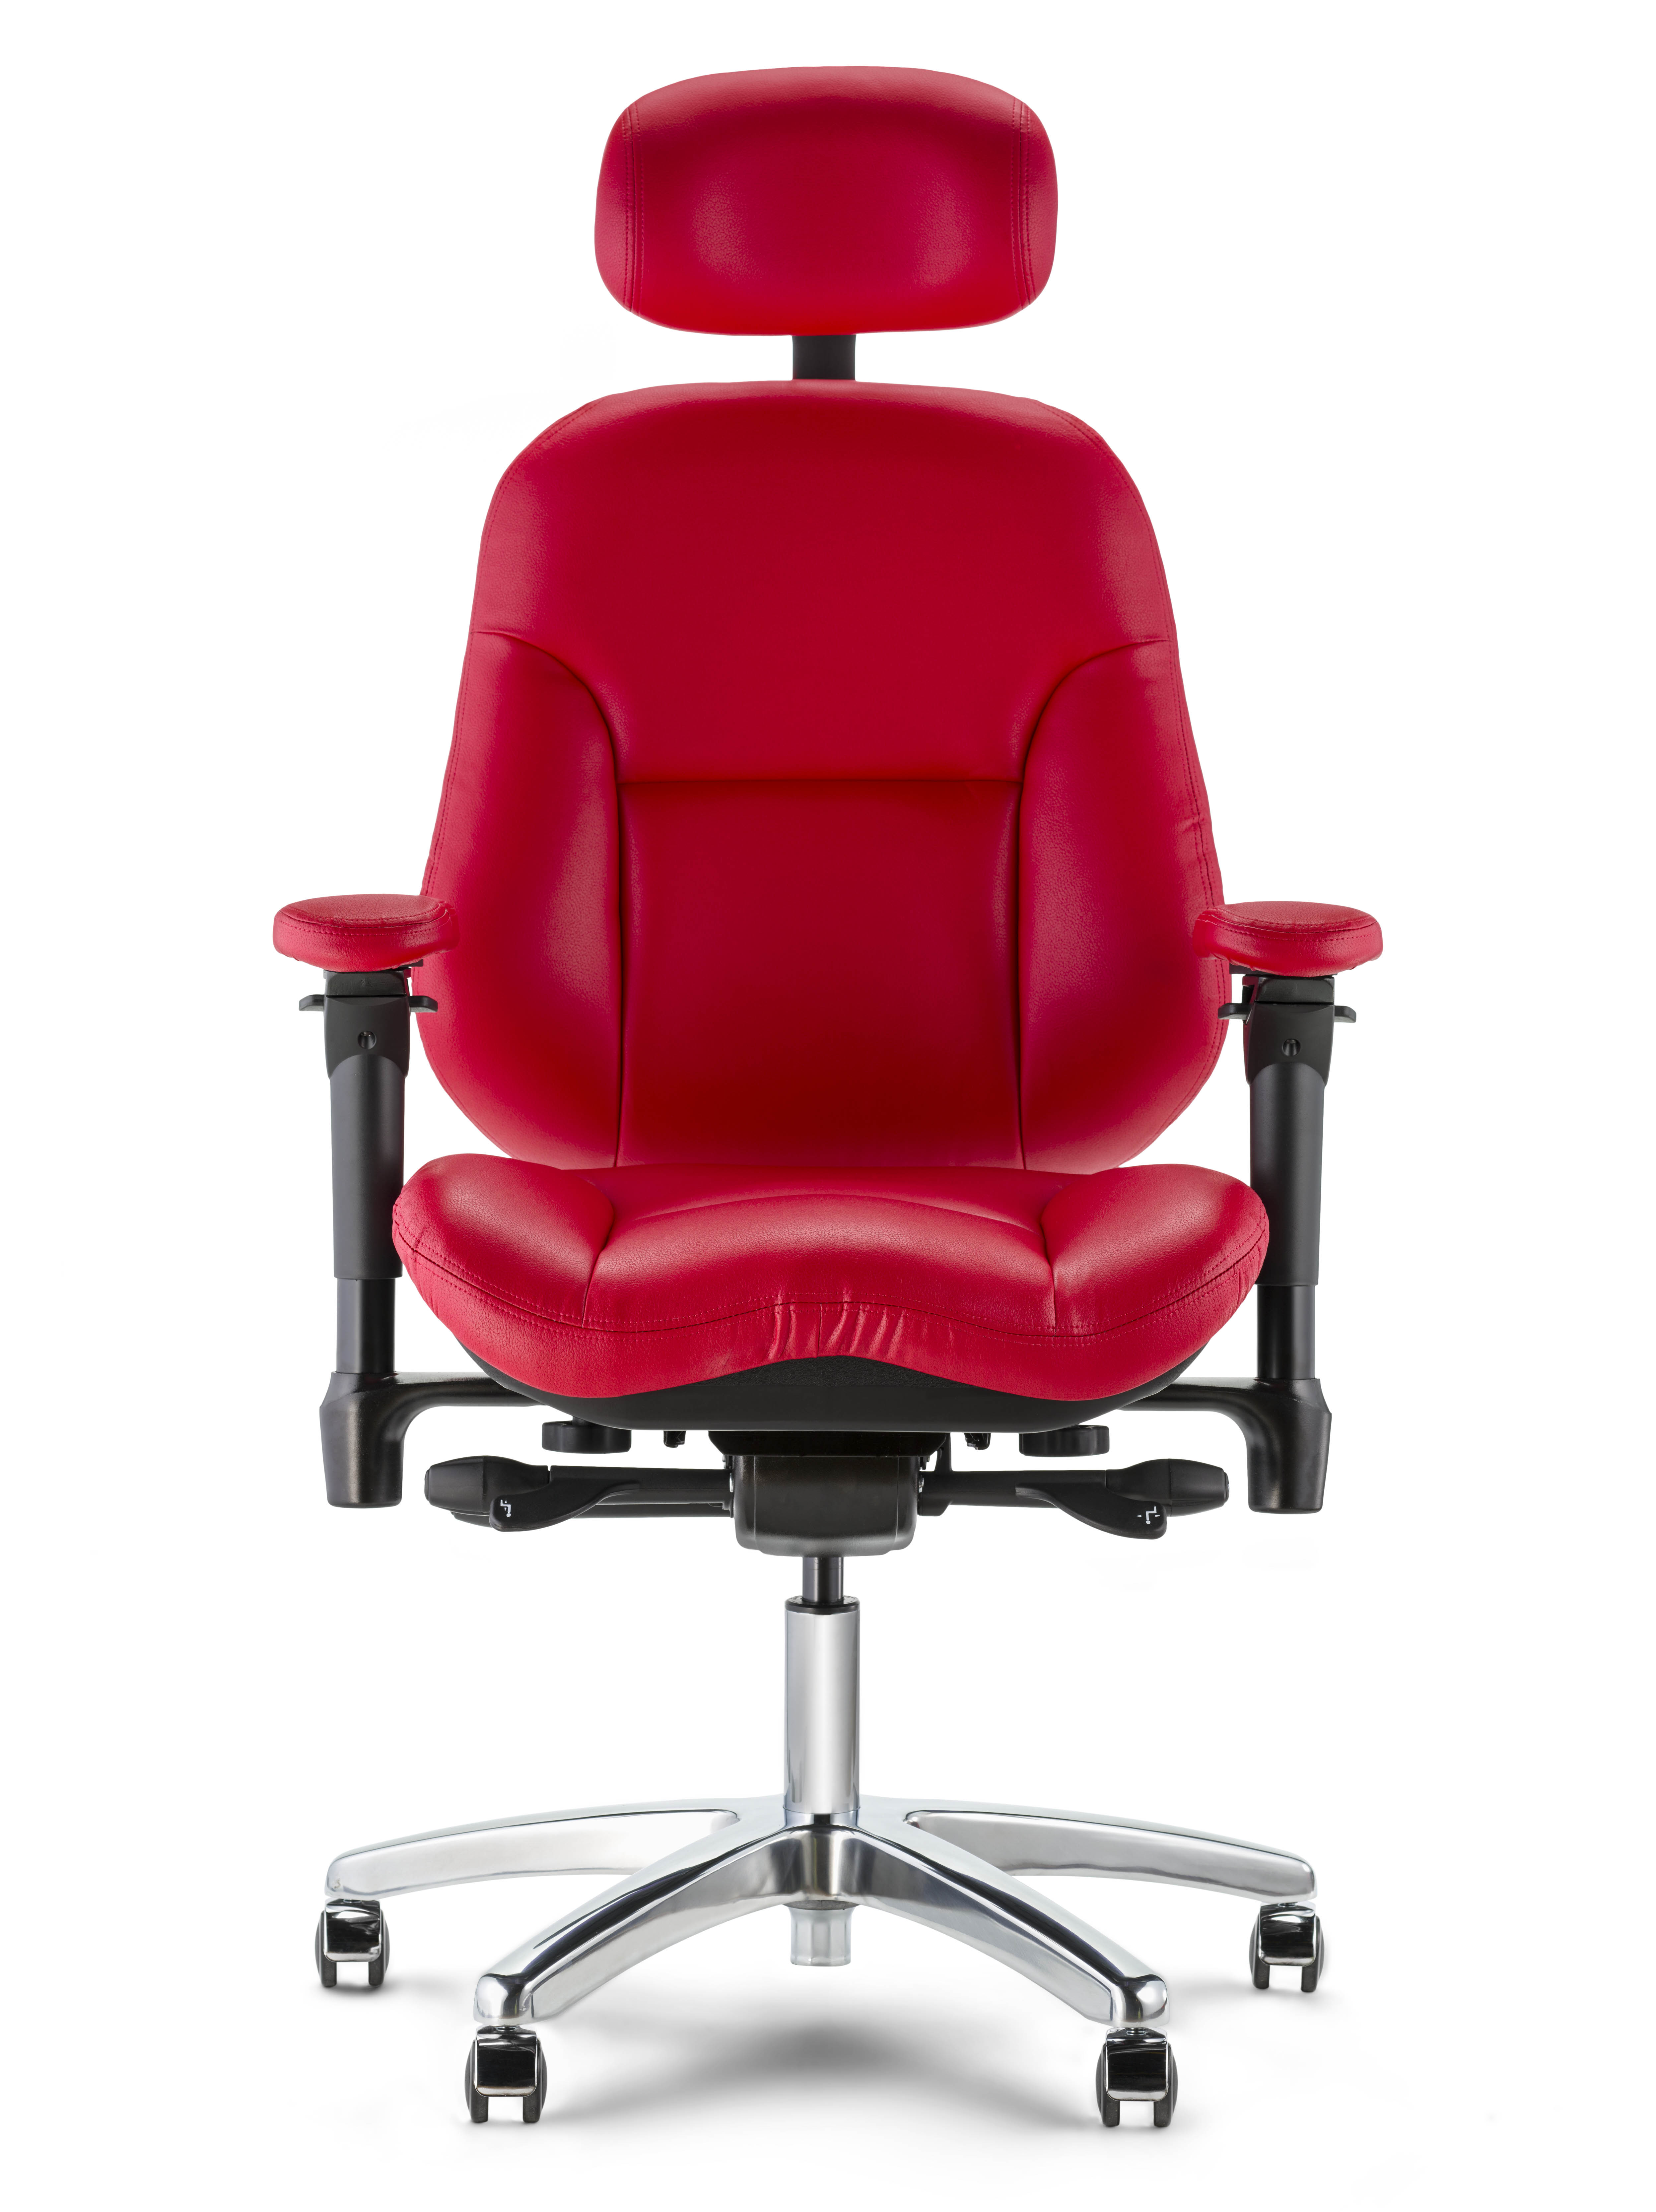 R3507 B13 S1 Executive chair chrome base Brisa Rose Red front view